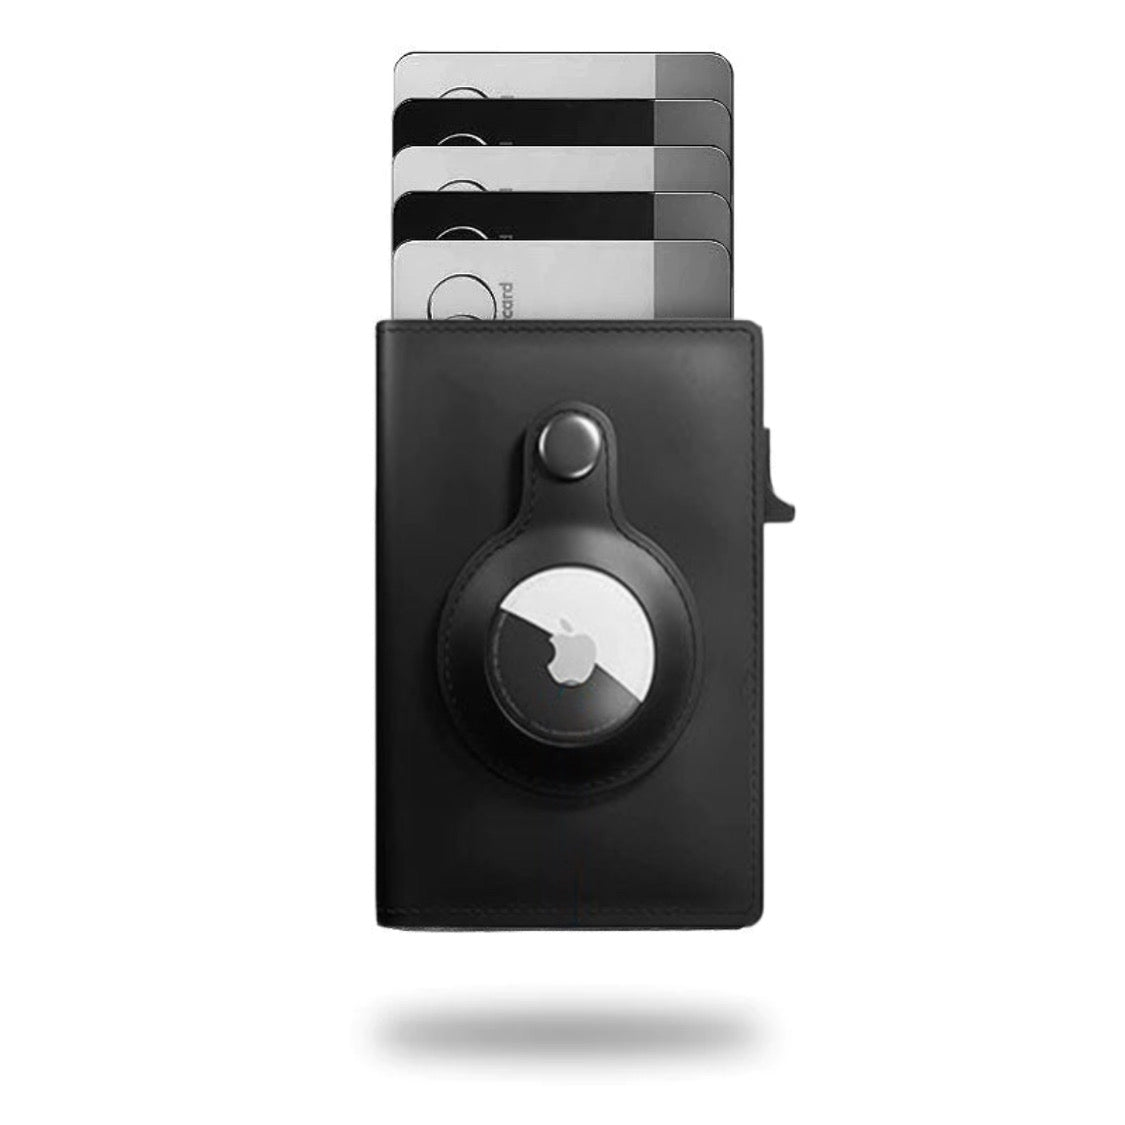 SMART-TRACK AIRTAG WALLET – Rouela